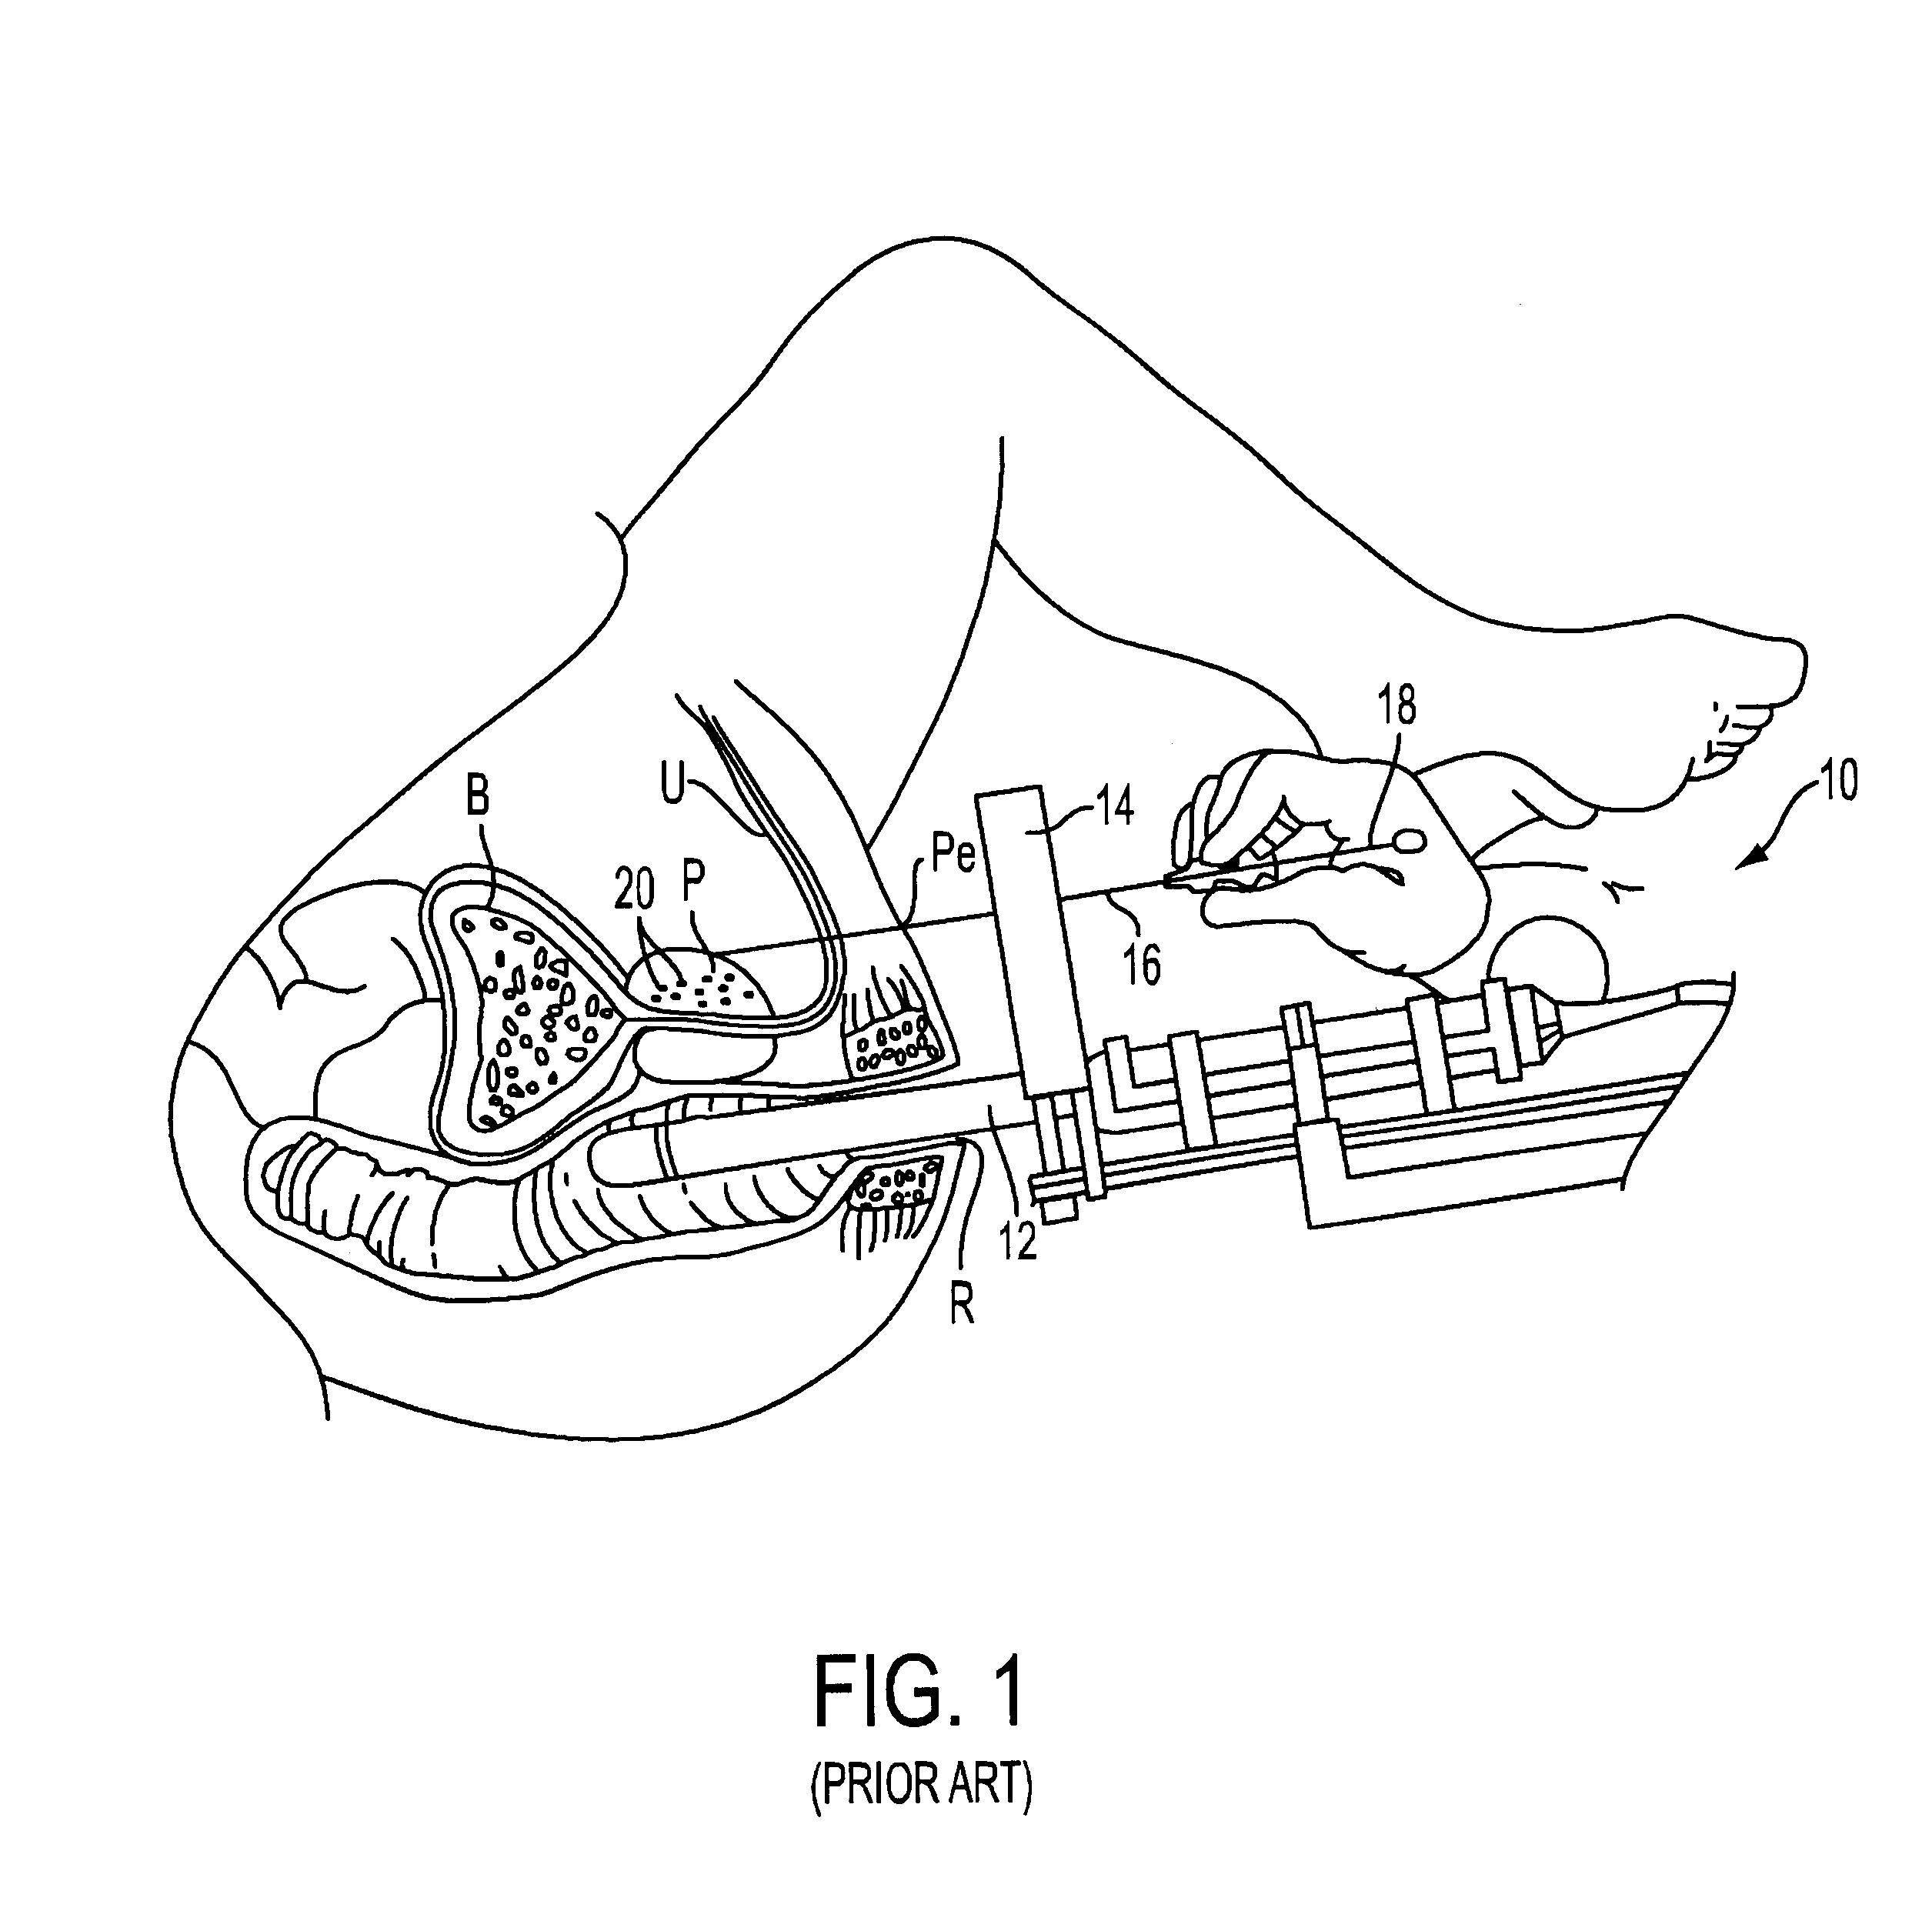 Methods and apparatus for loading radioactive seeds into brachytherapy needles